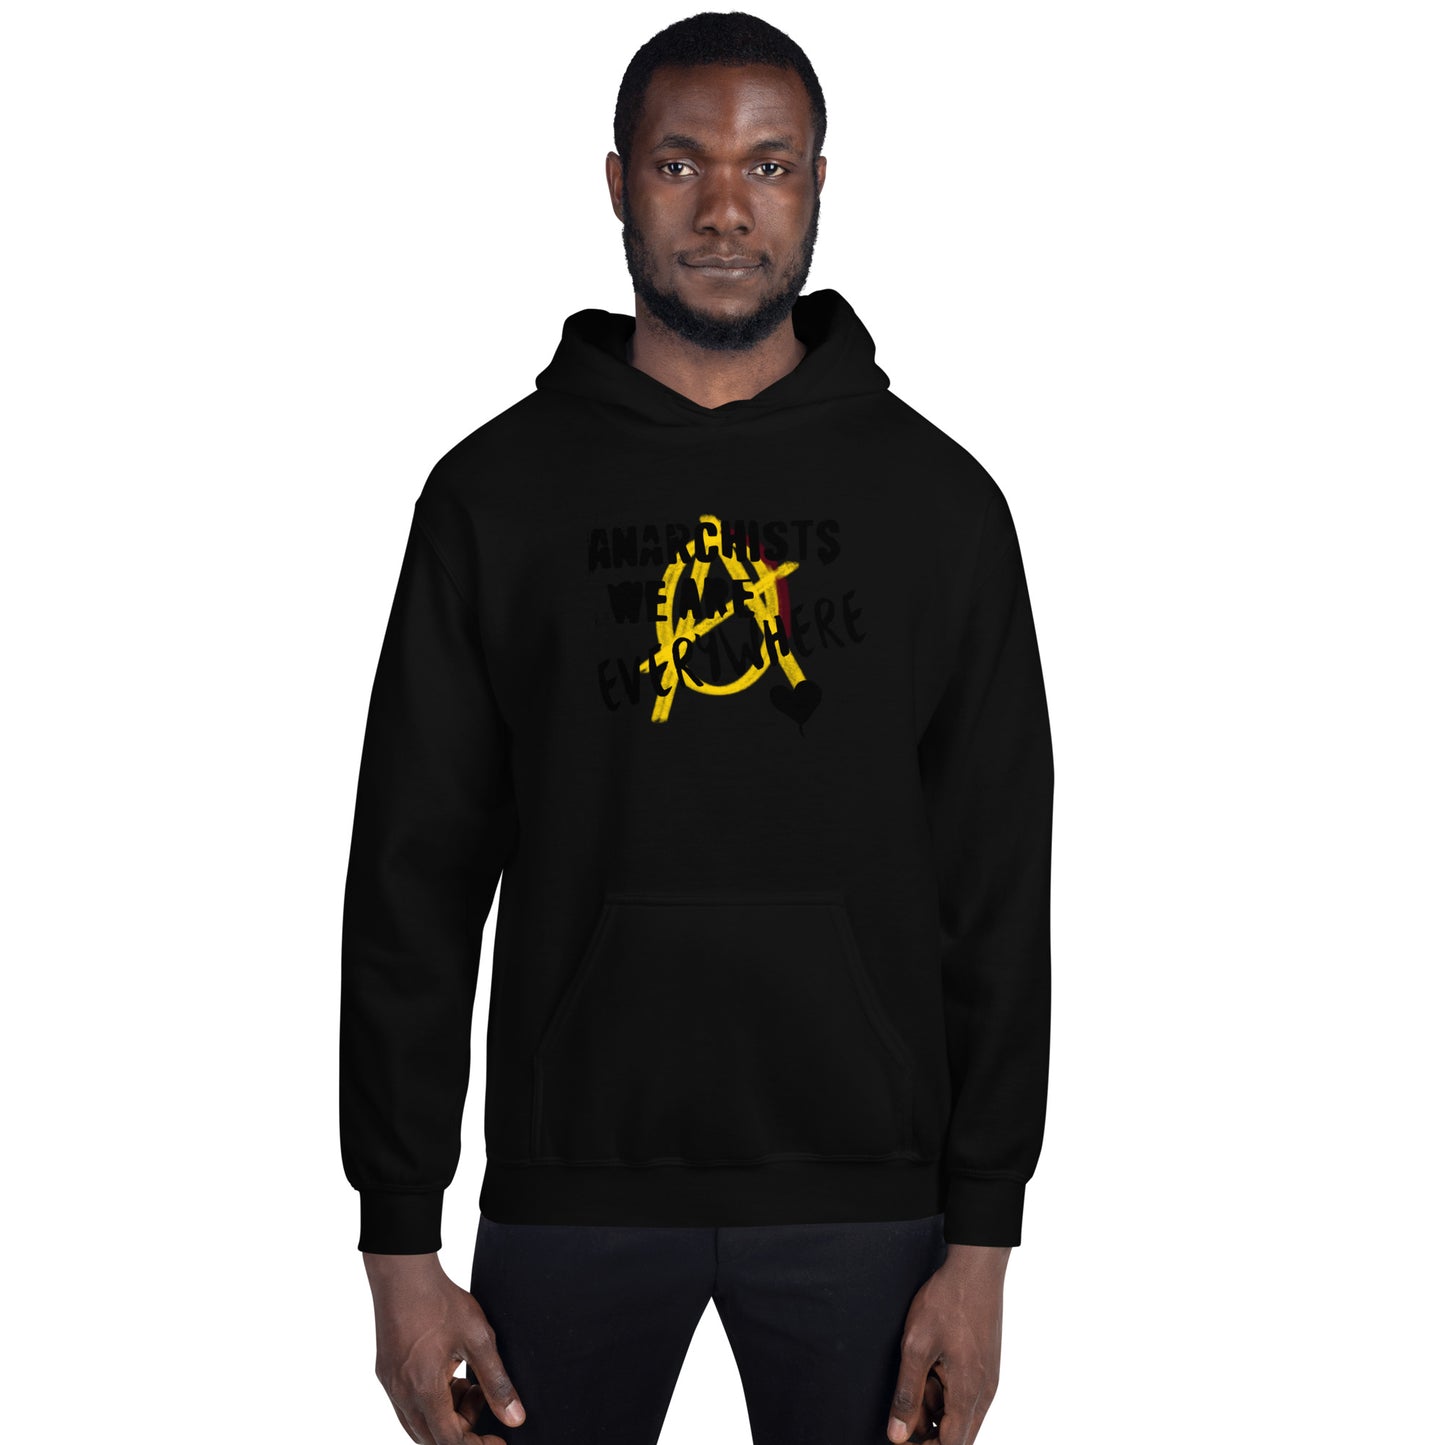 Anarchy Wear "We Are Every Where" Black on Gold Unisex Hoodie